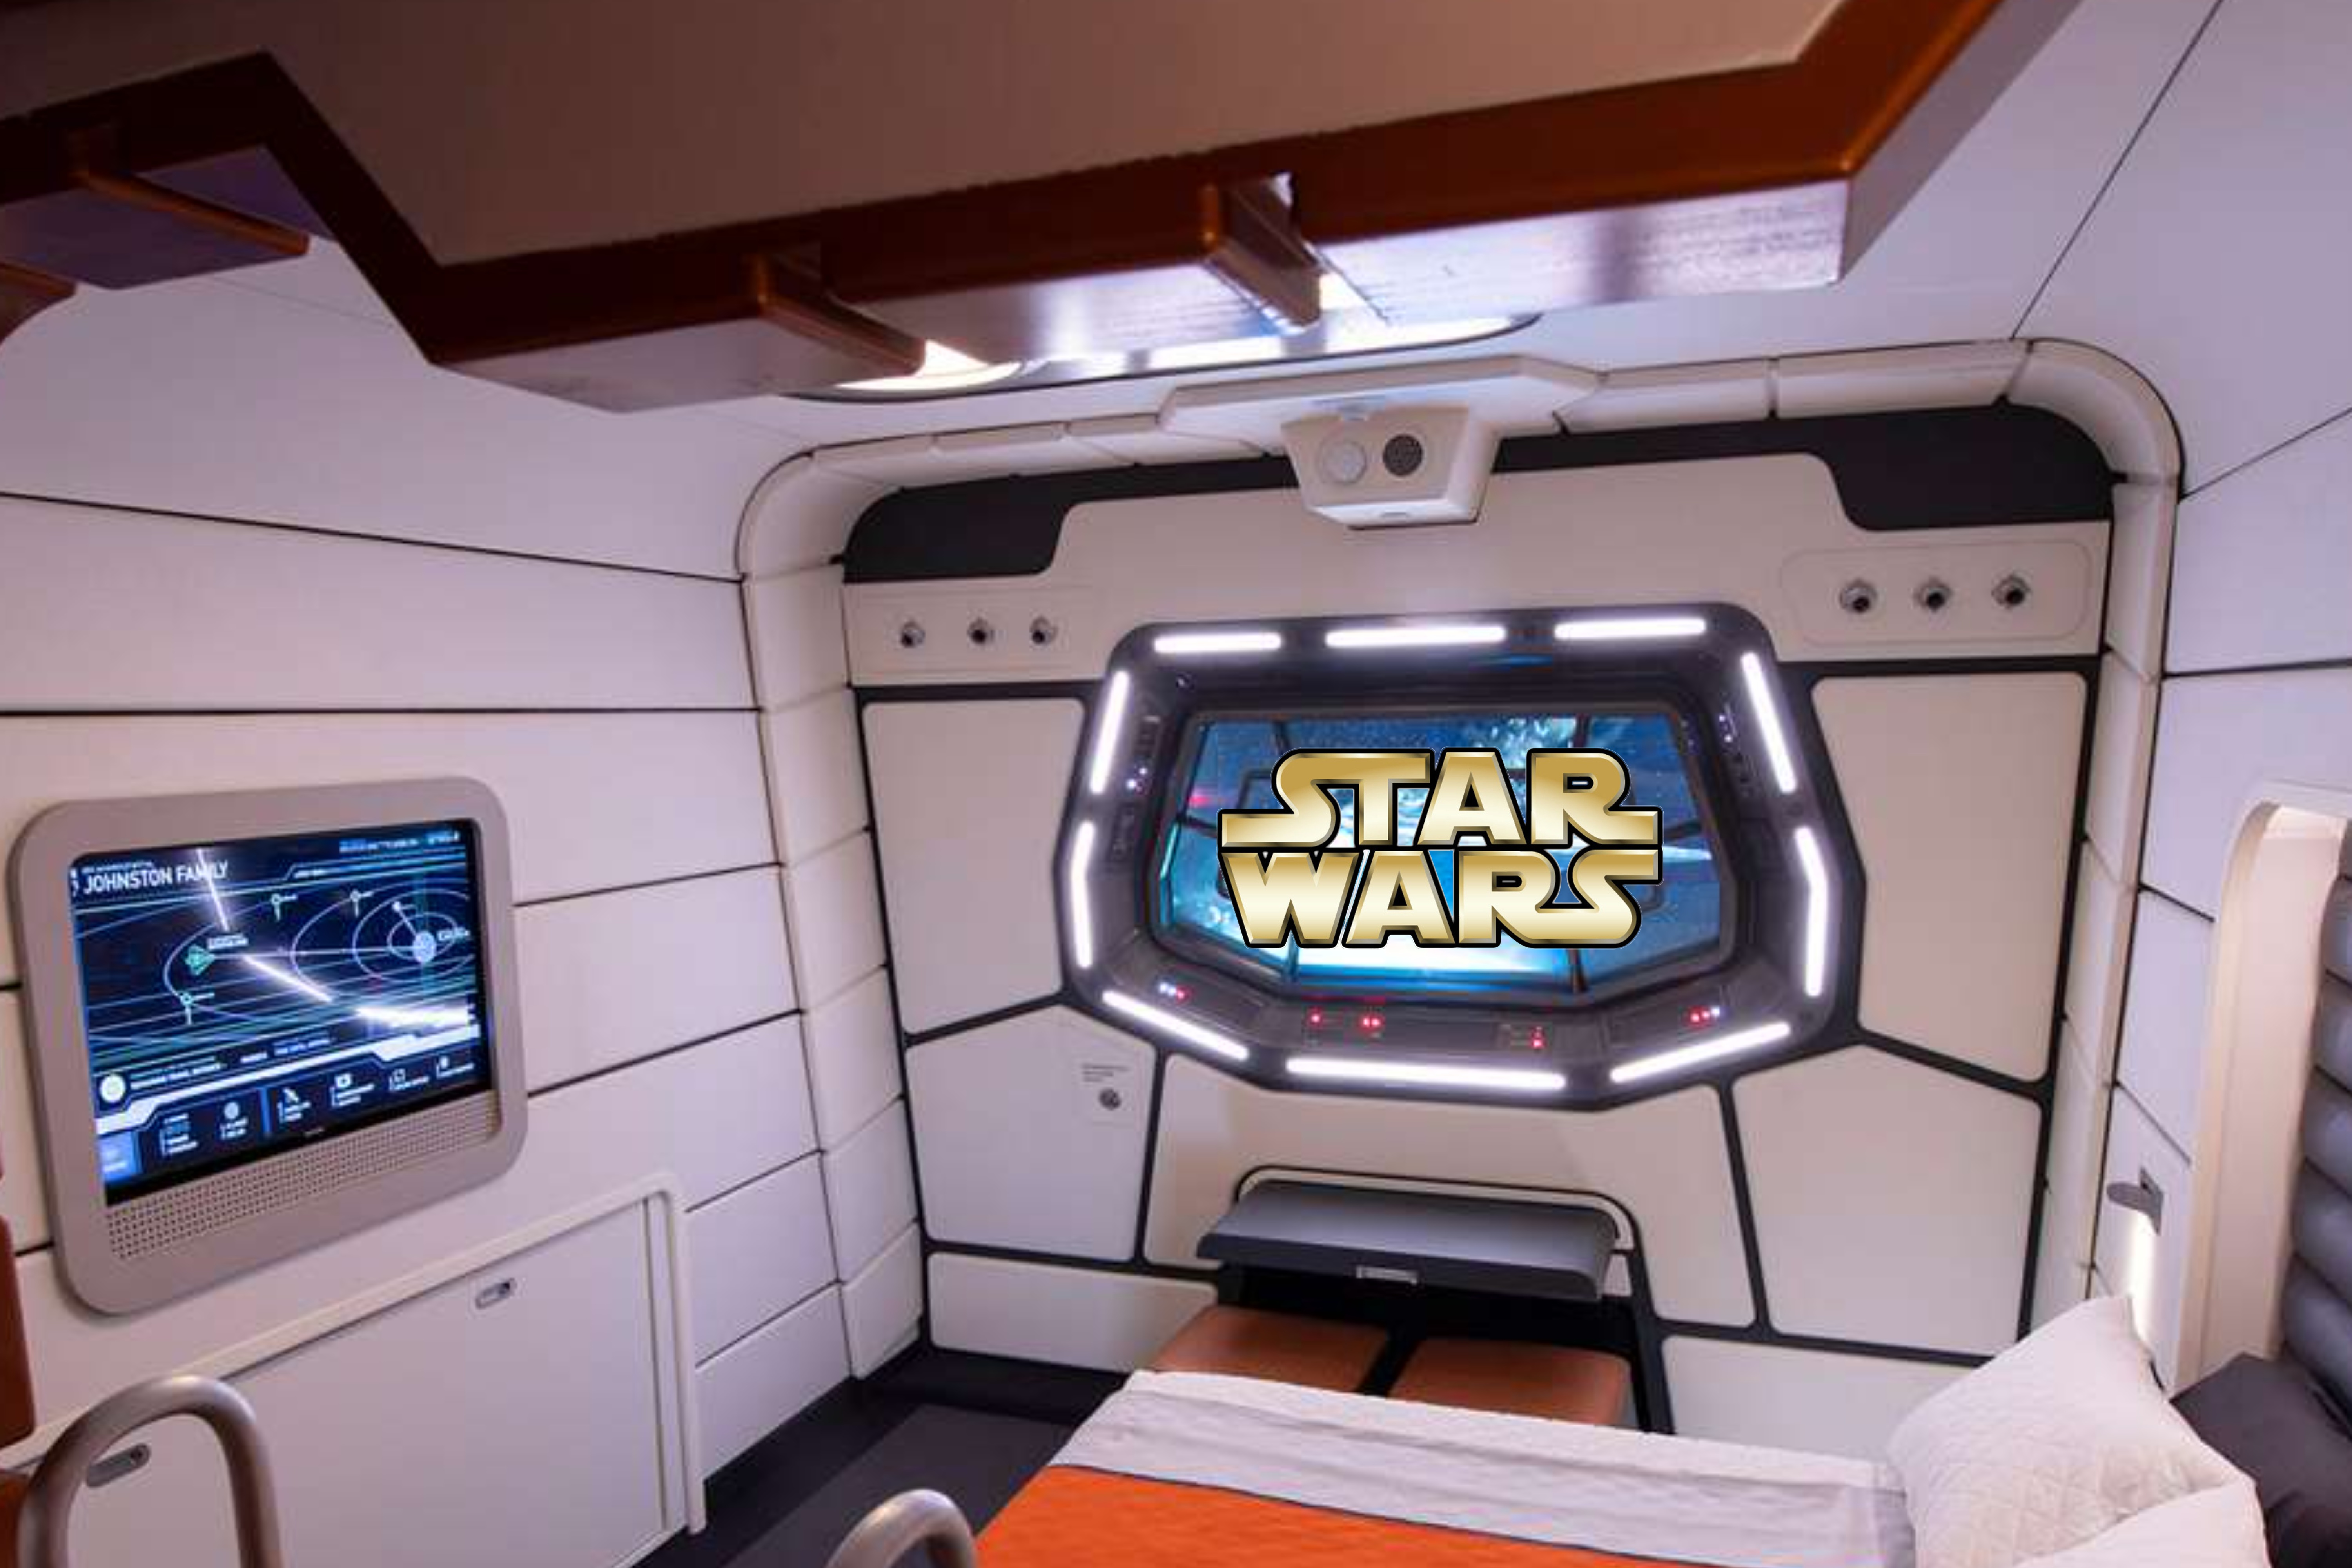 Disney to close iconic, costly Star Wars Galactic Starcruiser innovative experience